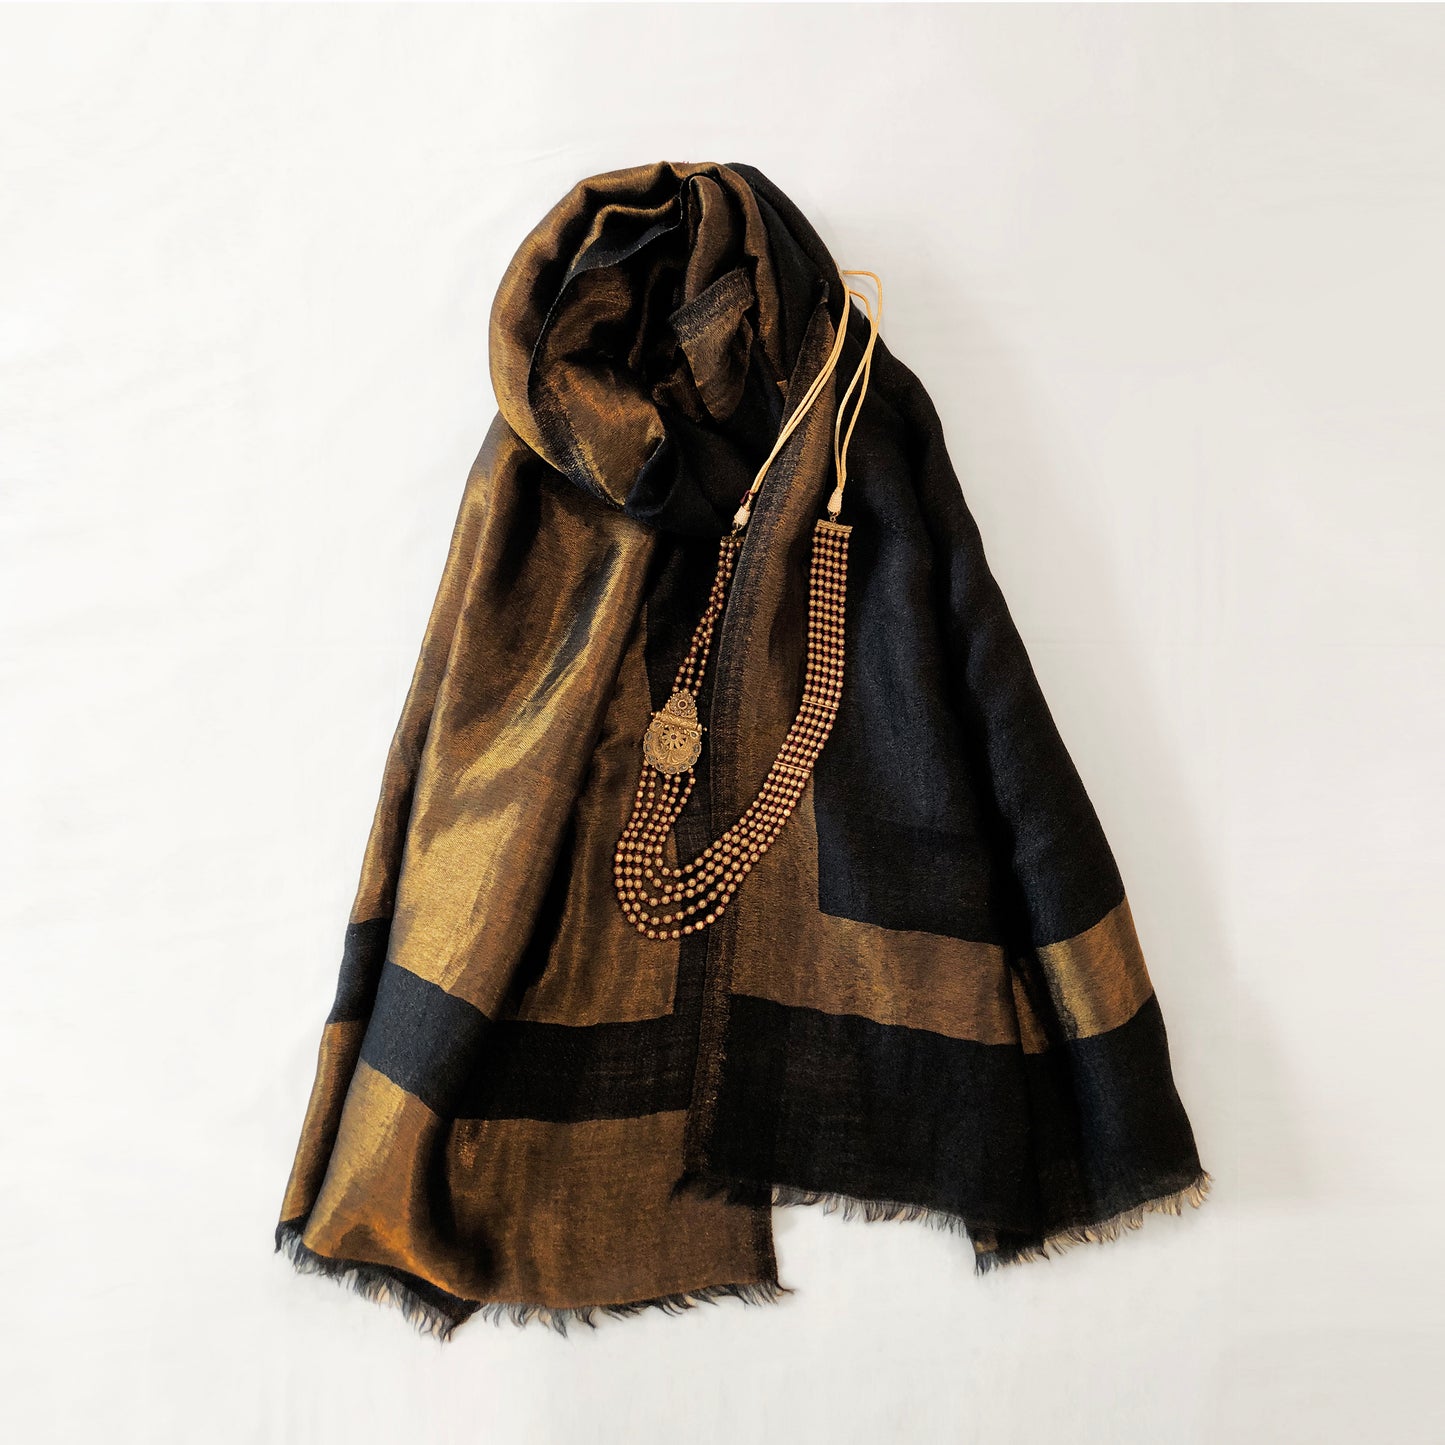 Black fine wool scarf with gold zari border, reversible stole